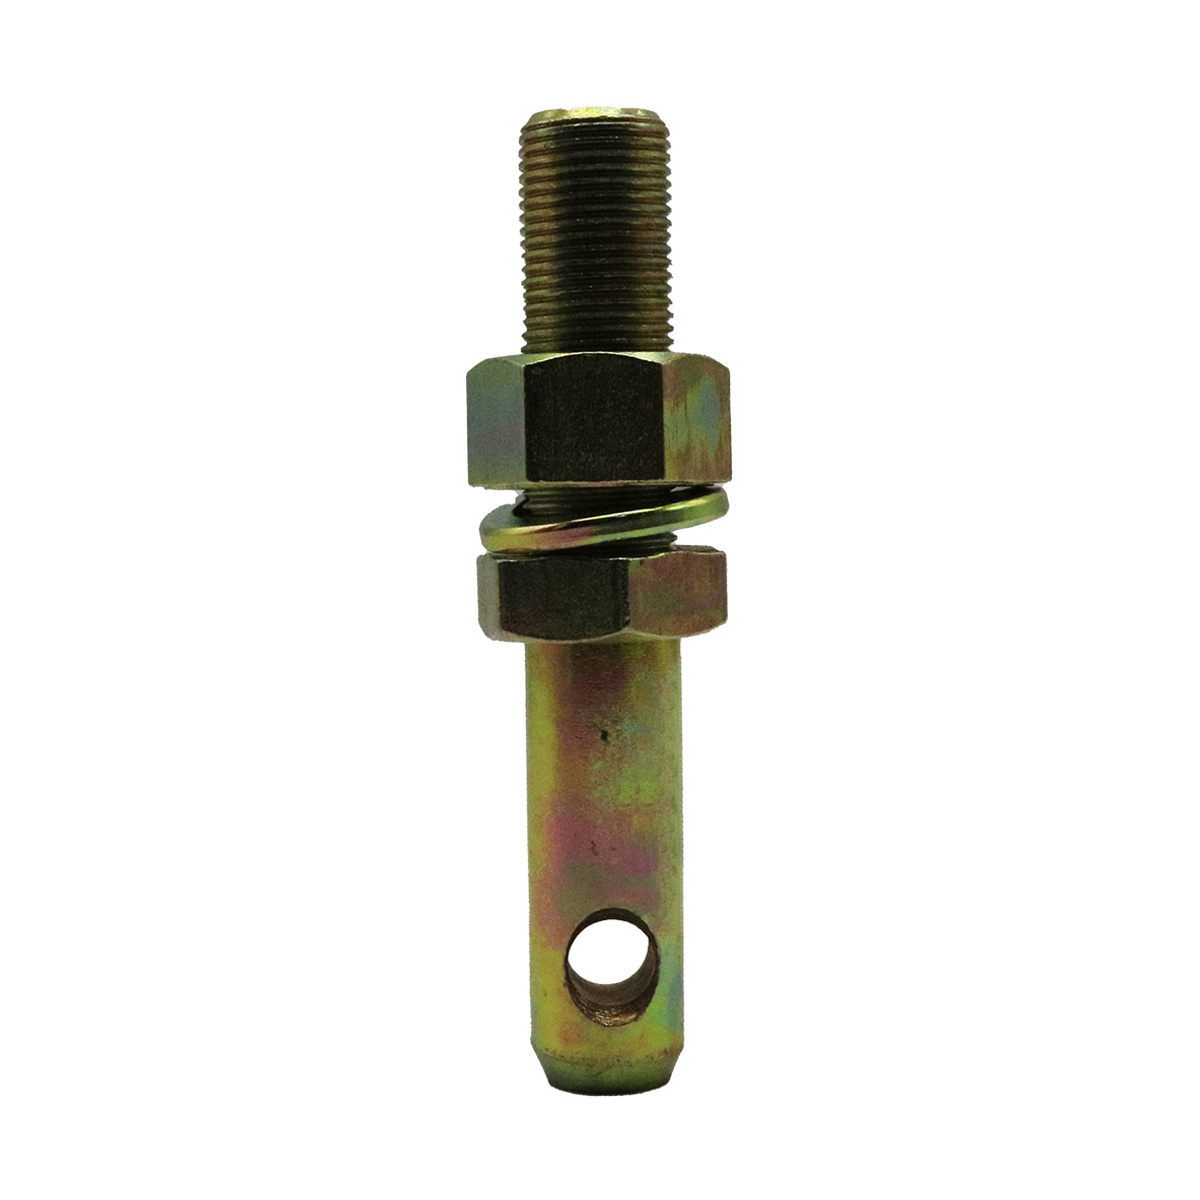 Adjustable Category 1 Forged Lift Arm Pin